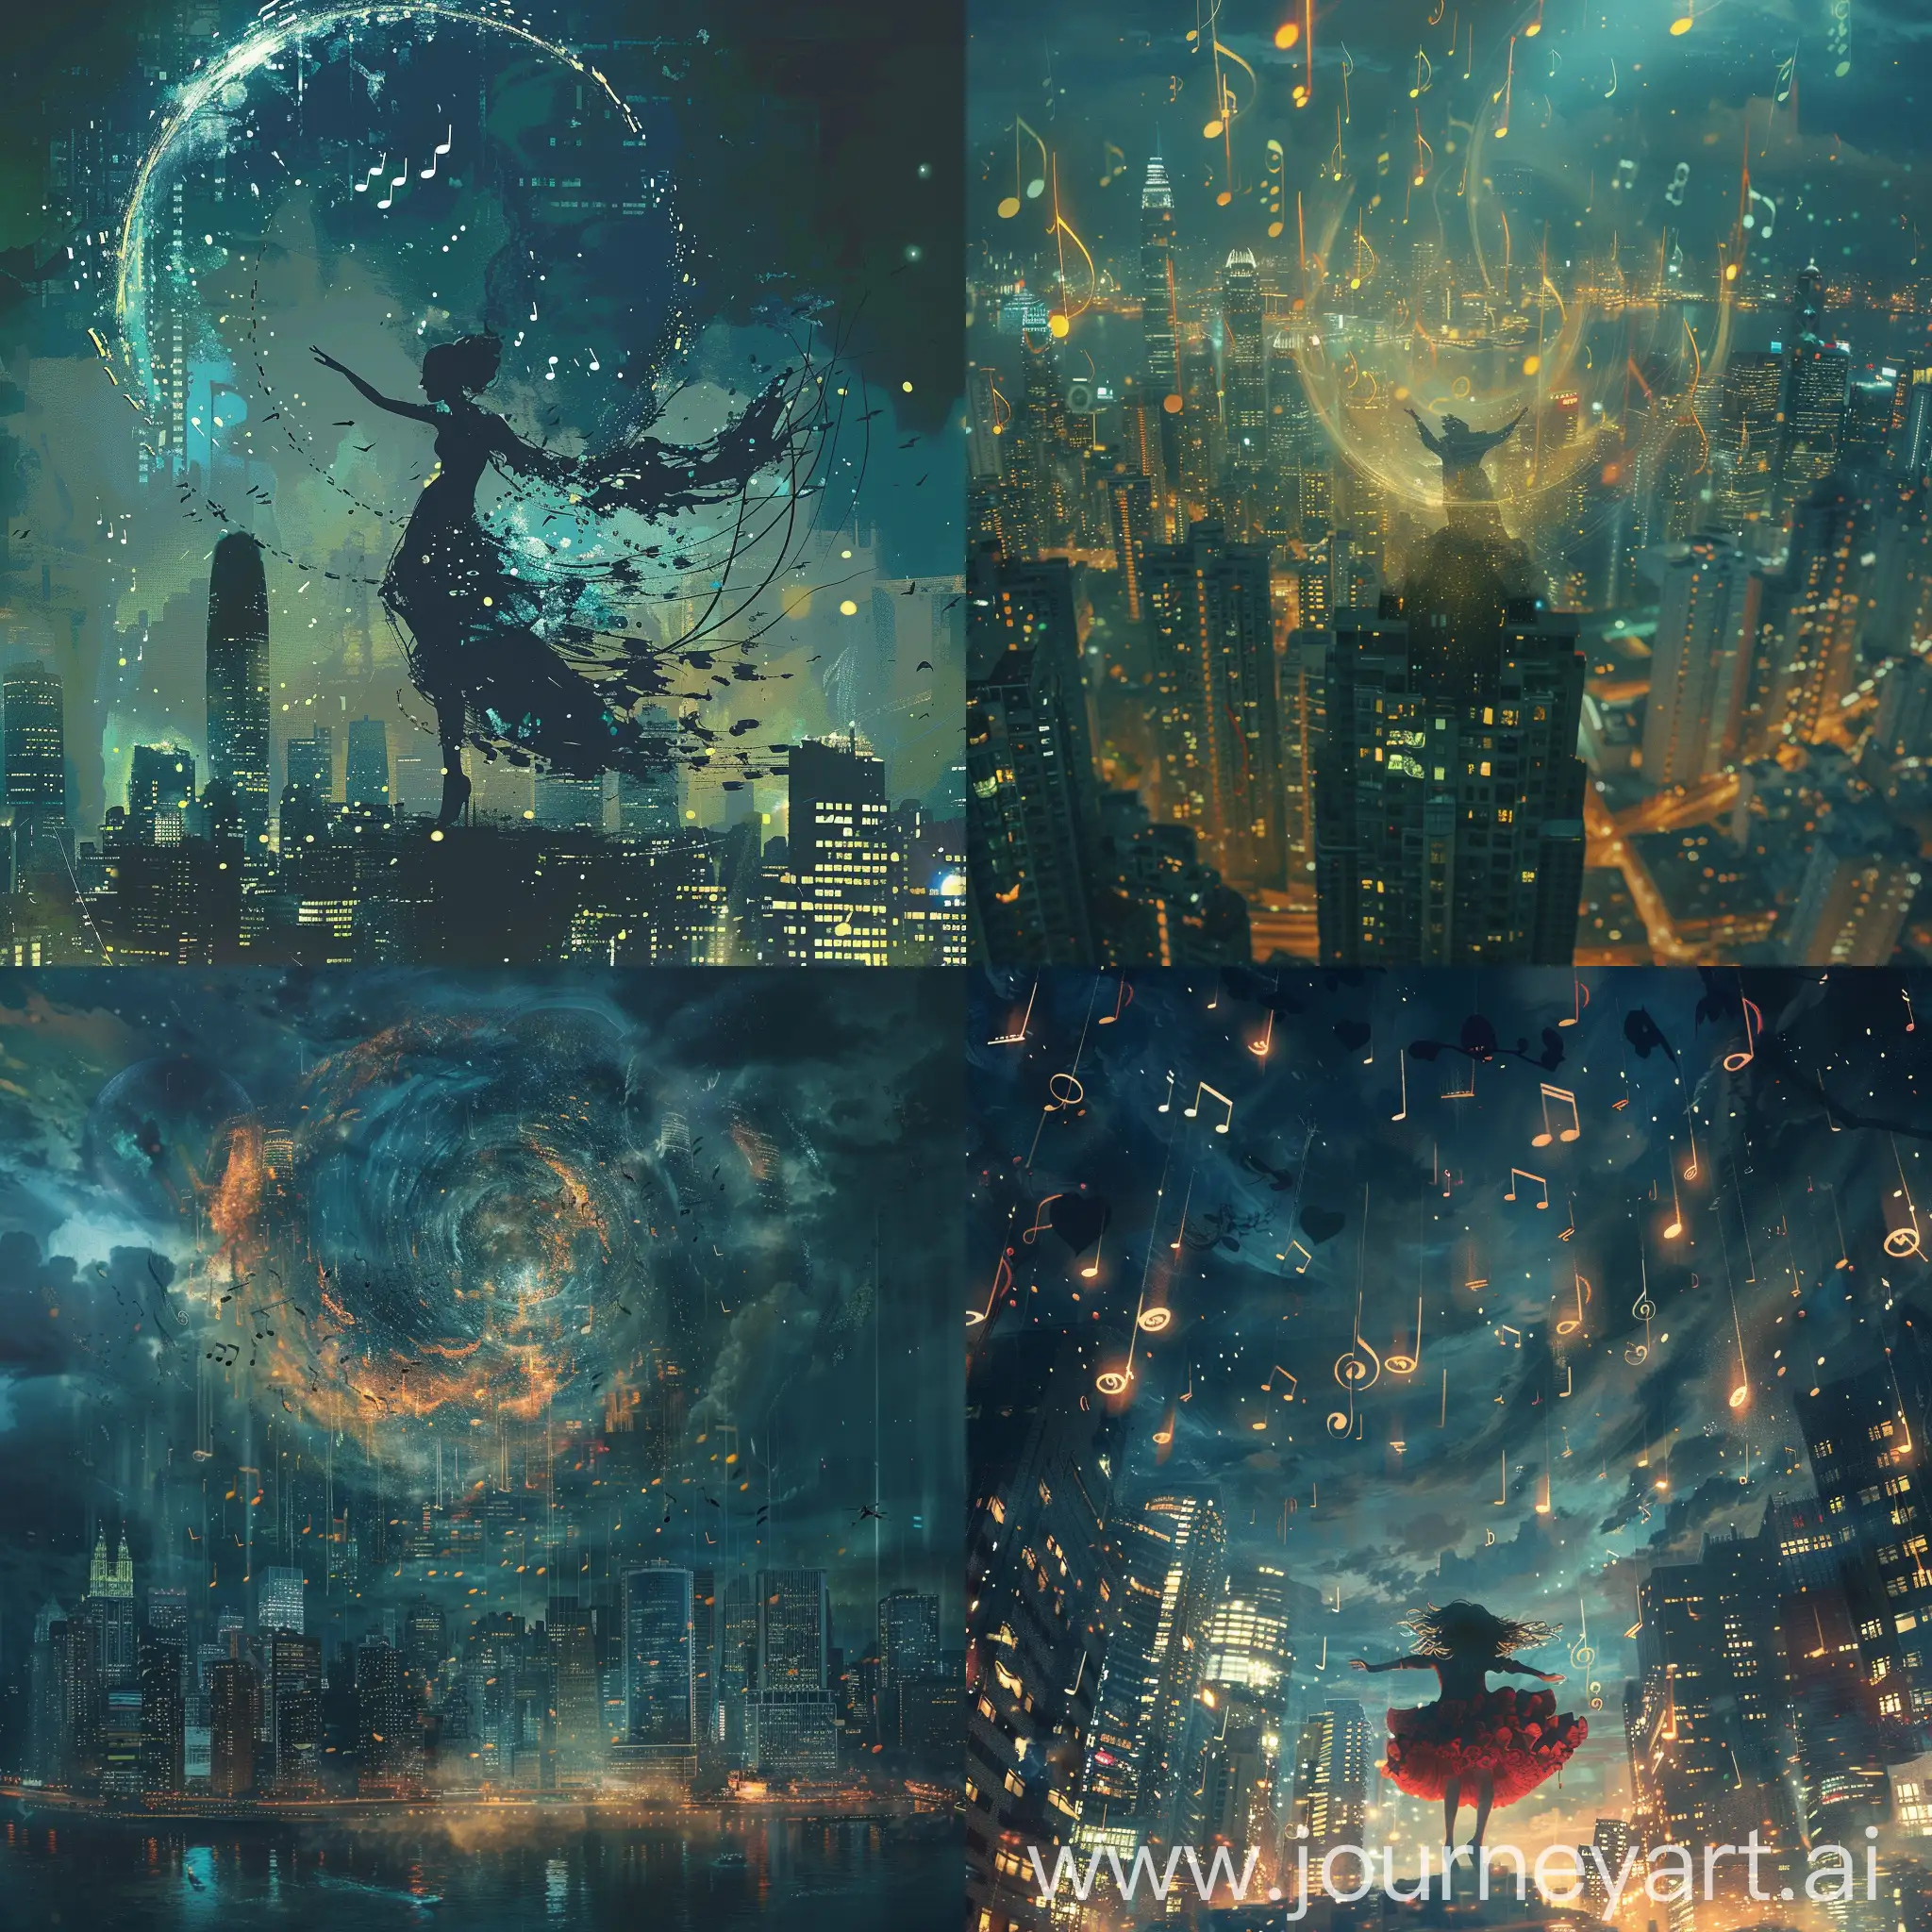 Musical-Creature-Rises-Above-Night-City-Evoking-Poetic-Atmosphere-with-Songs-and-Melodies